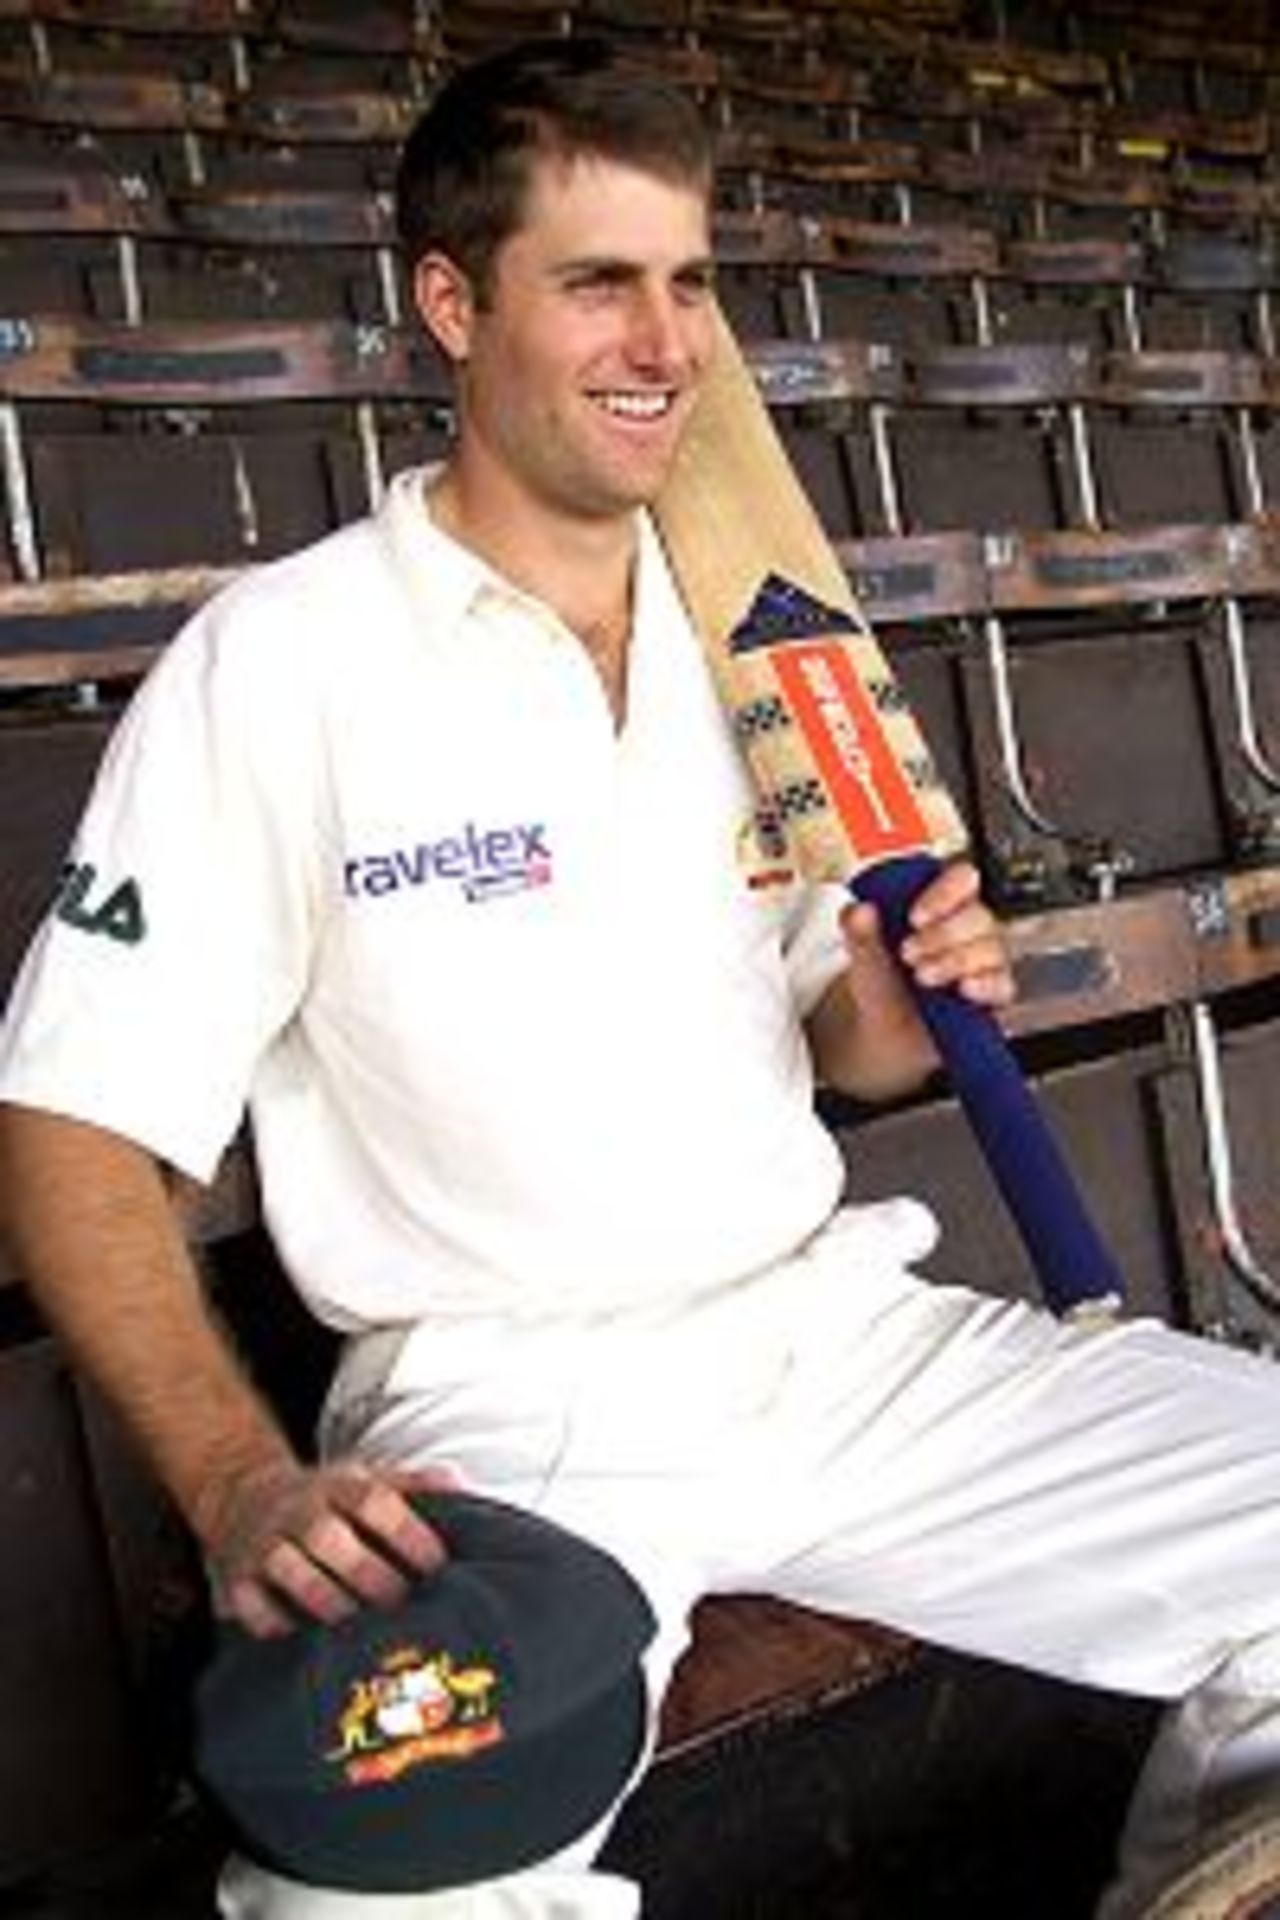 Simon Katich of Australia looks ahead to his test debut after being picked for the 4th test, at Headingley, Leeds, England.